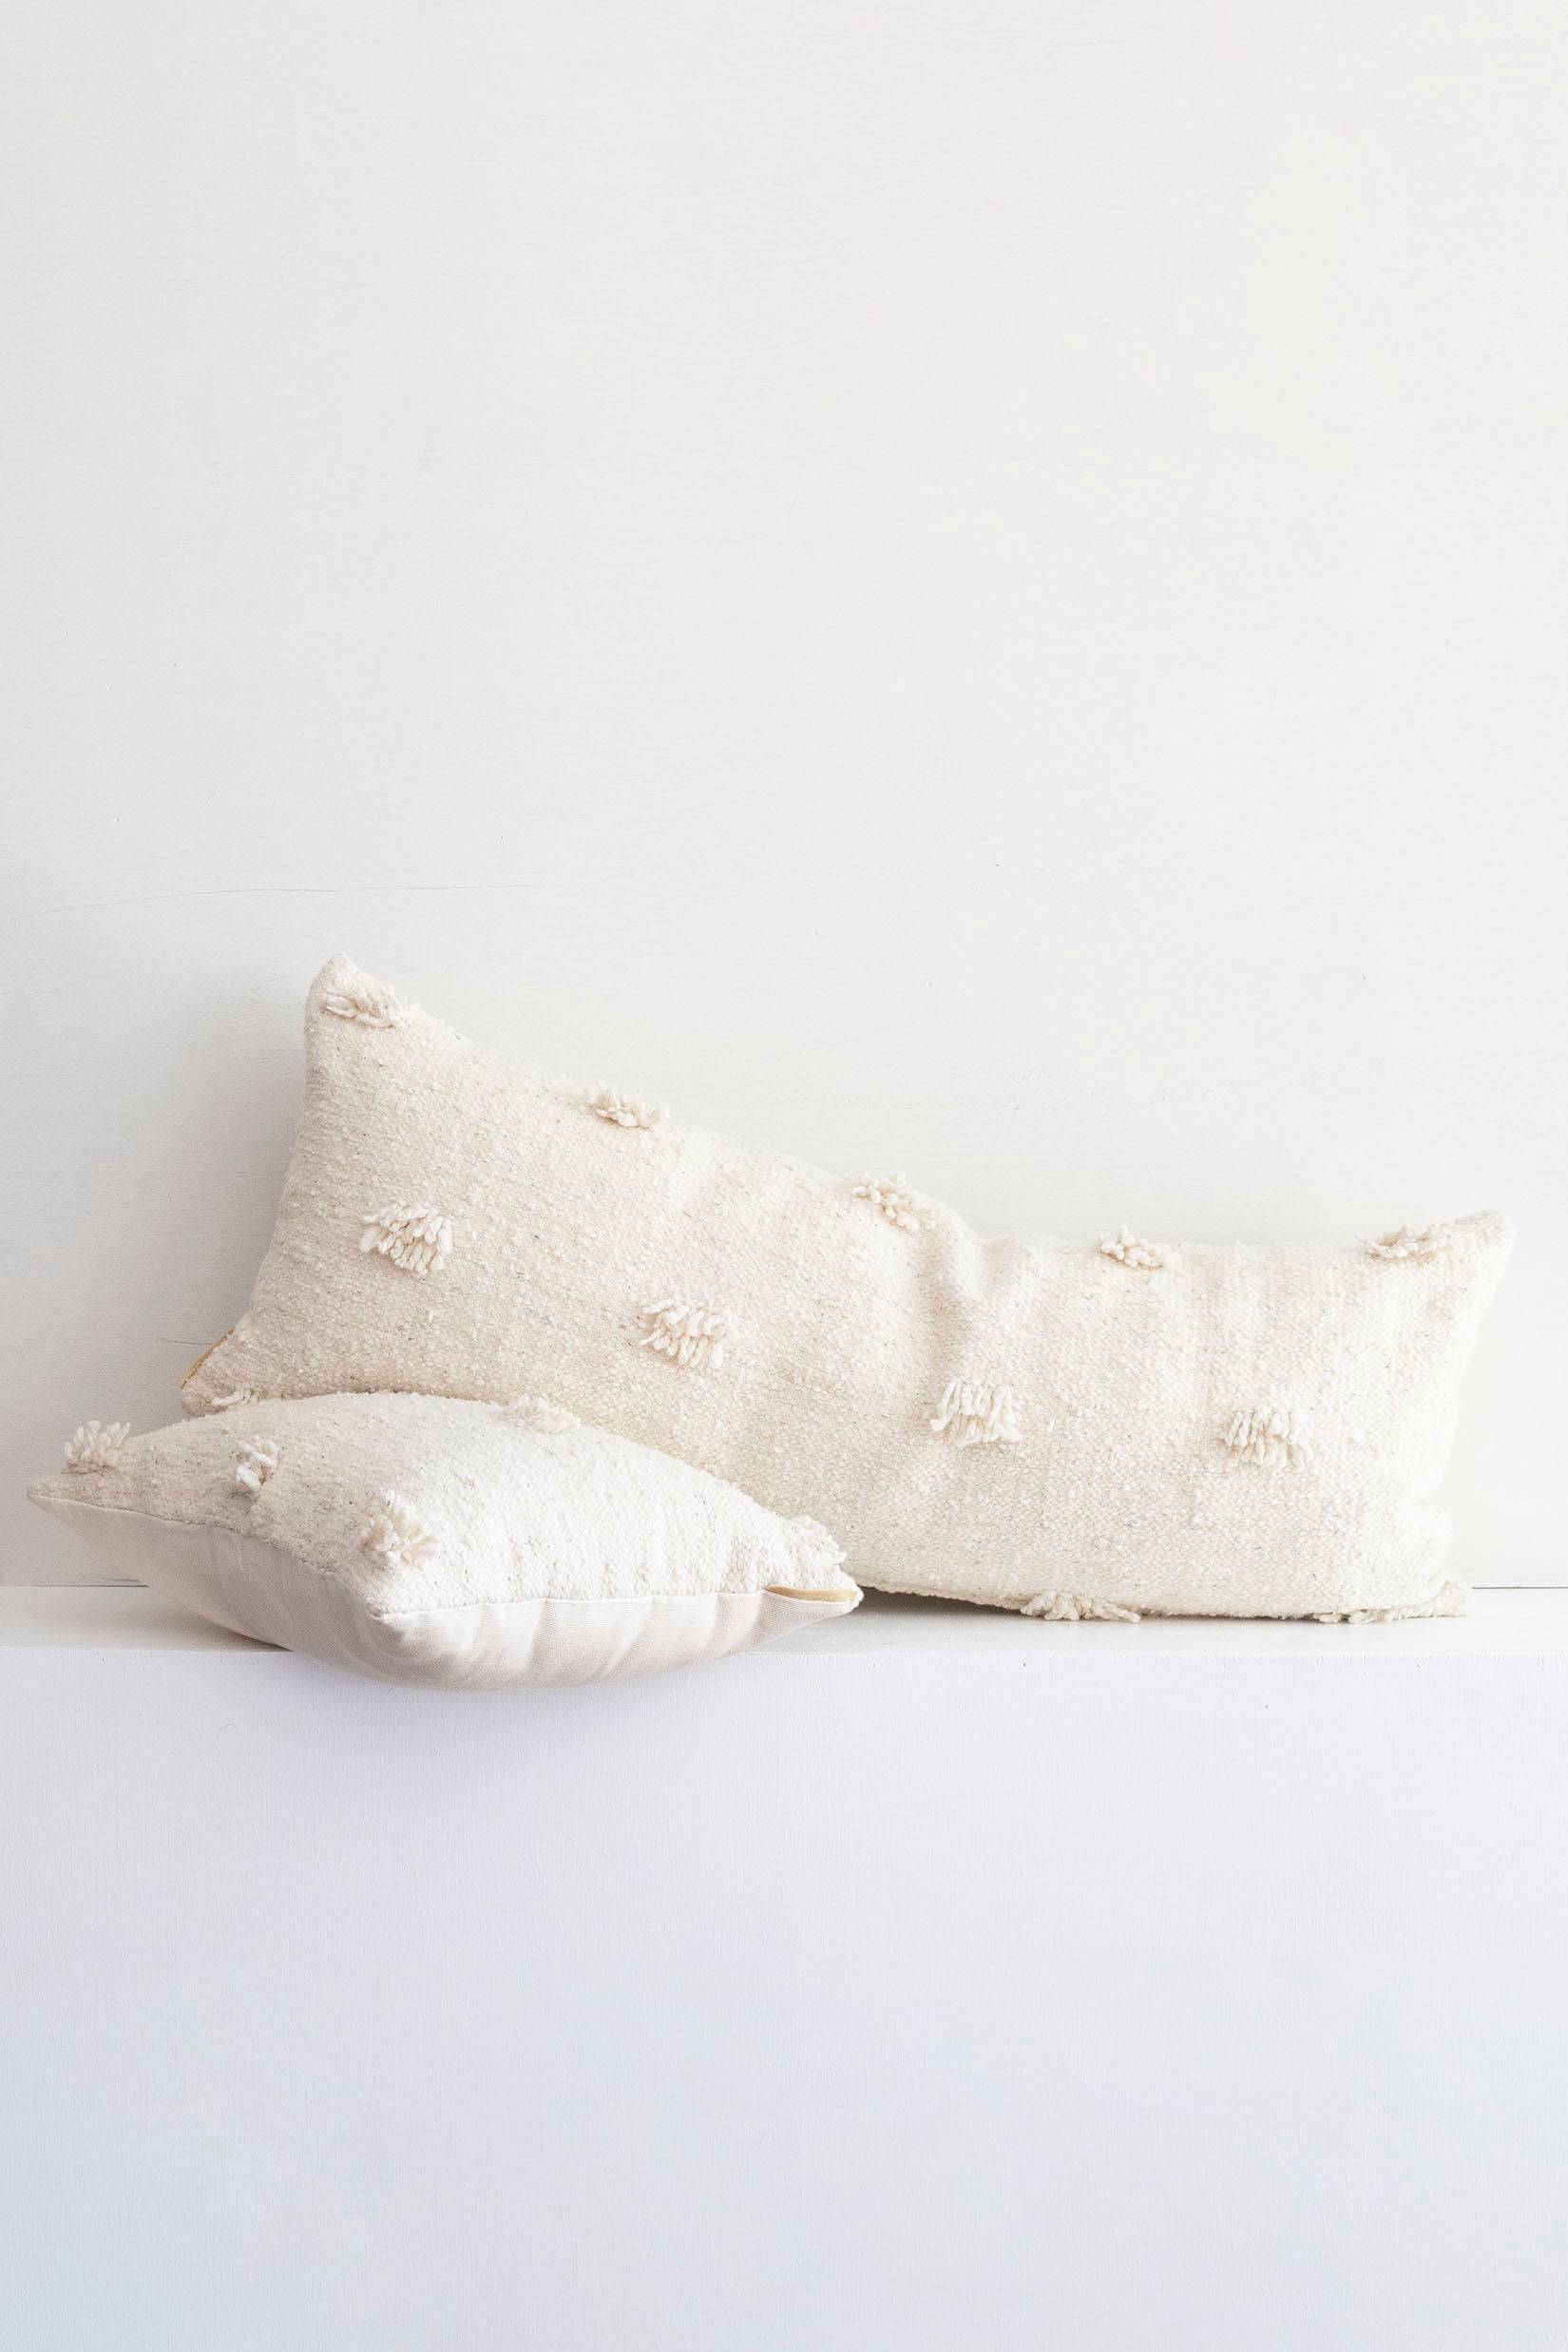 Large cream lumbar pillow with fringe accents laid on top of a smaller lumbar pillow in same style